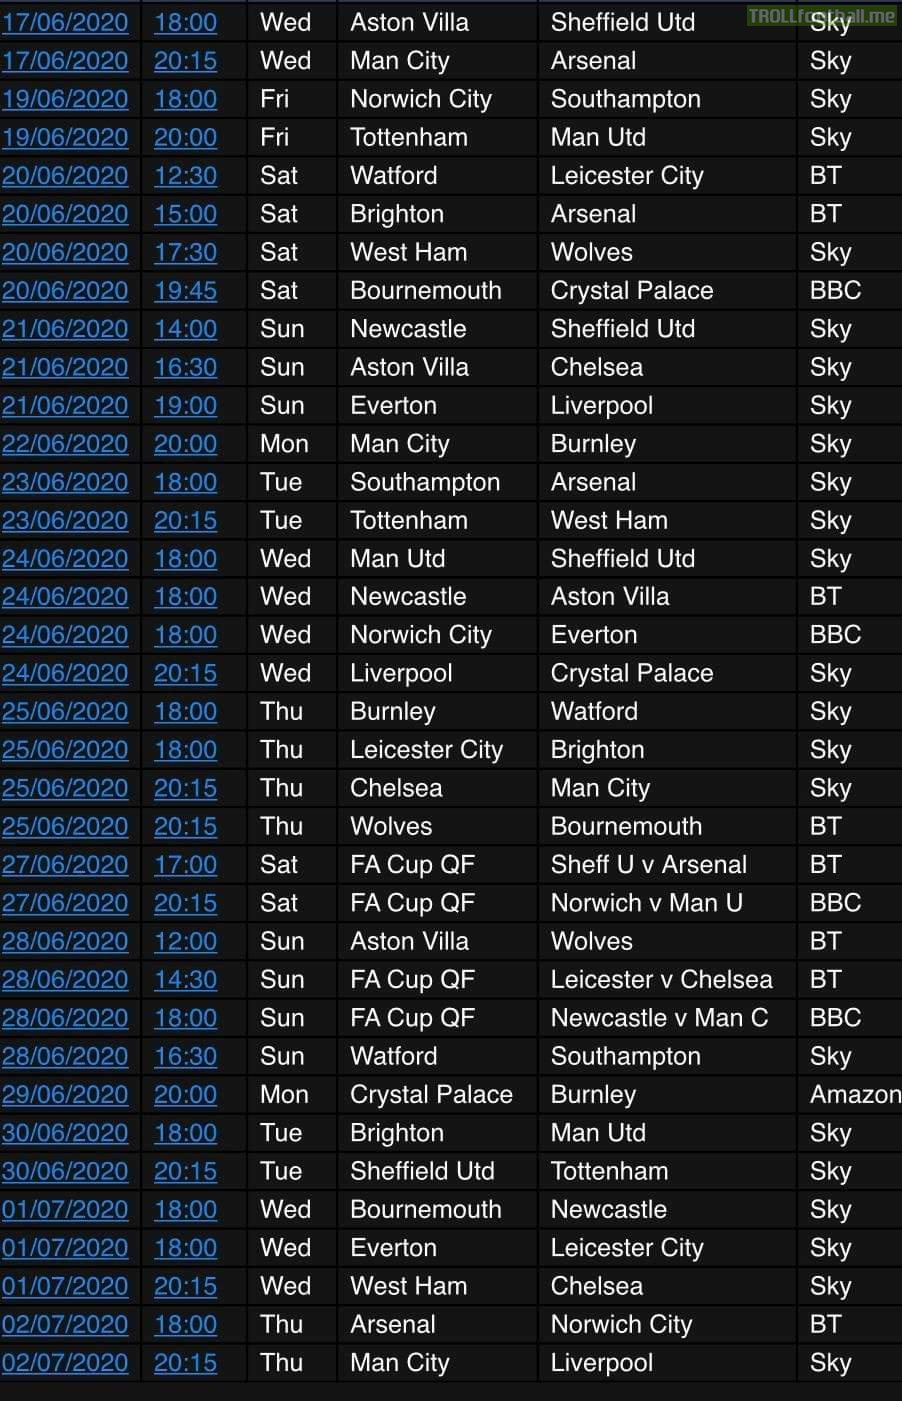 KO times (GMT) for the opening fixtures of the Premier League